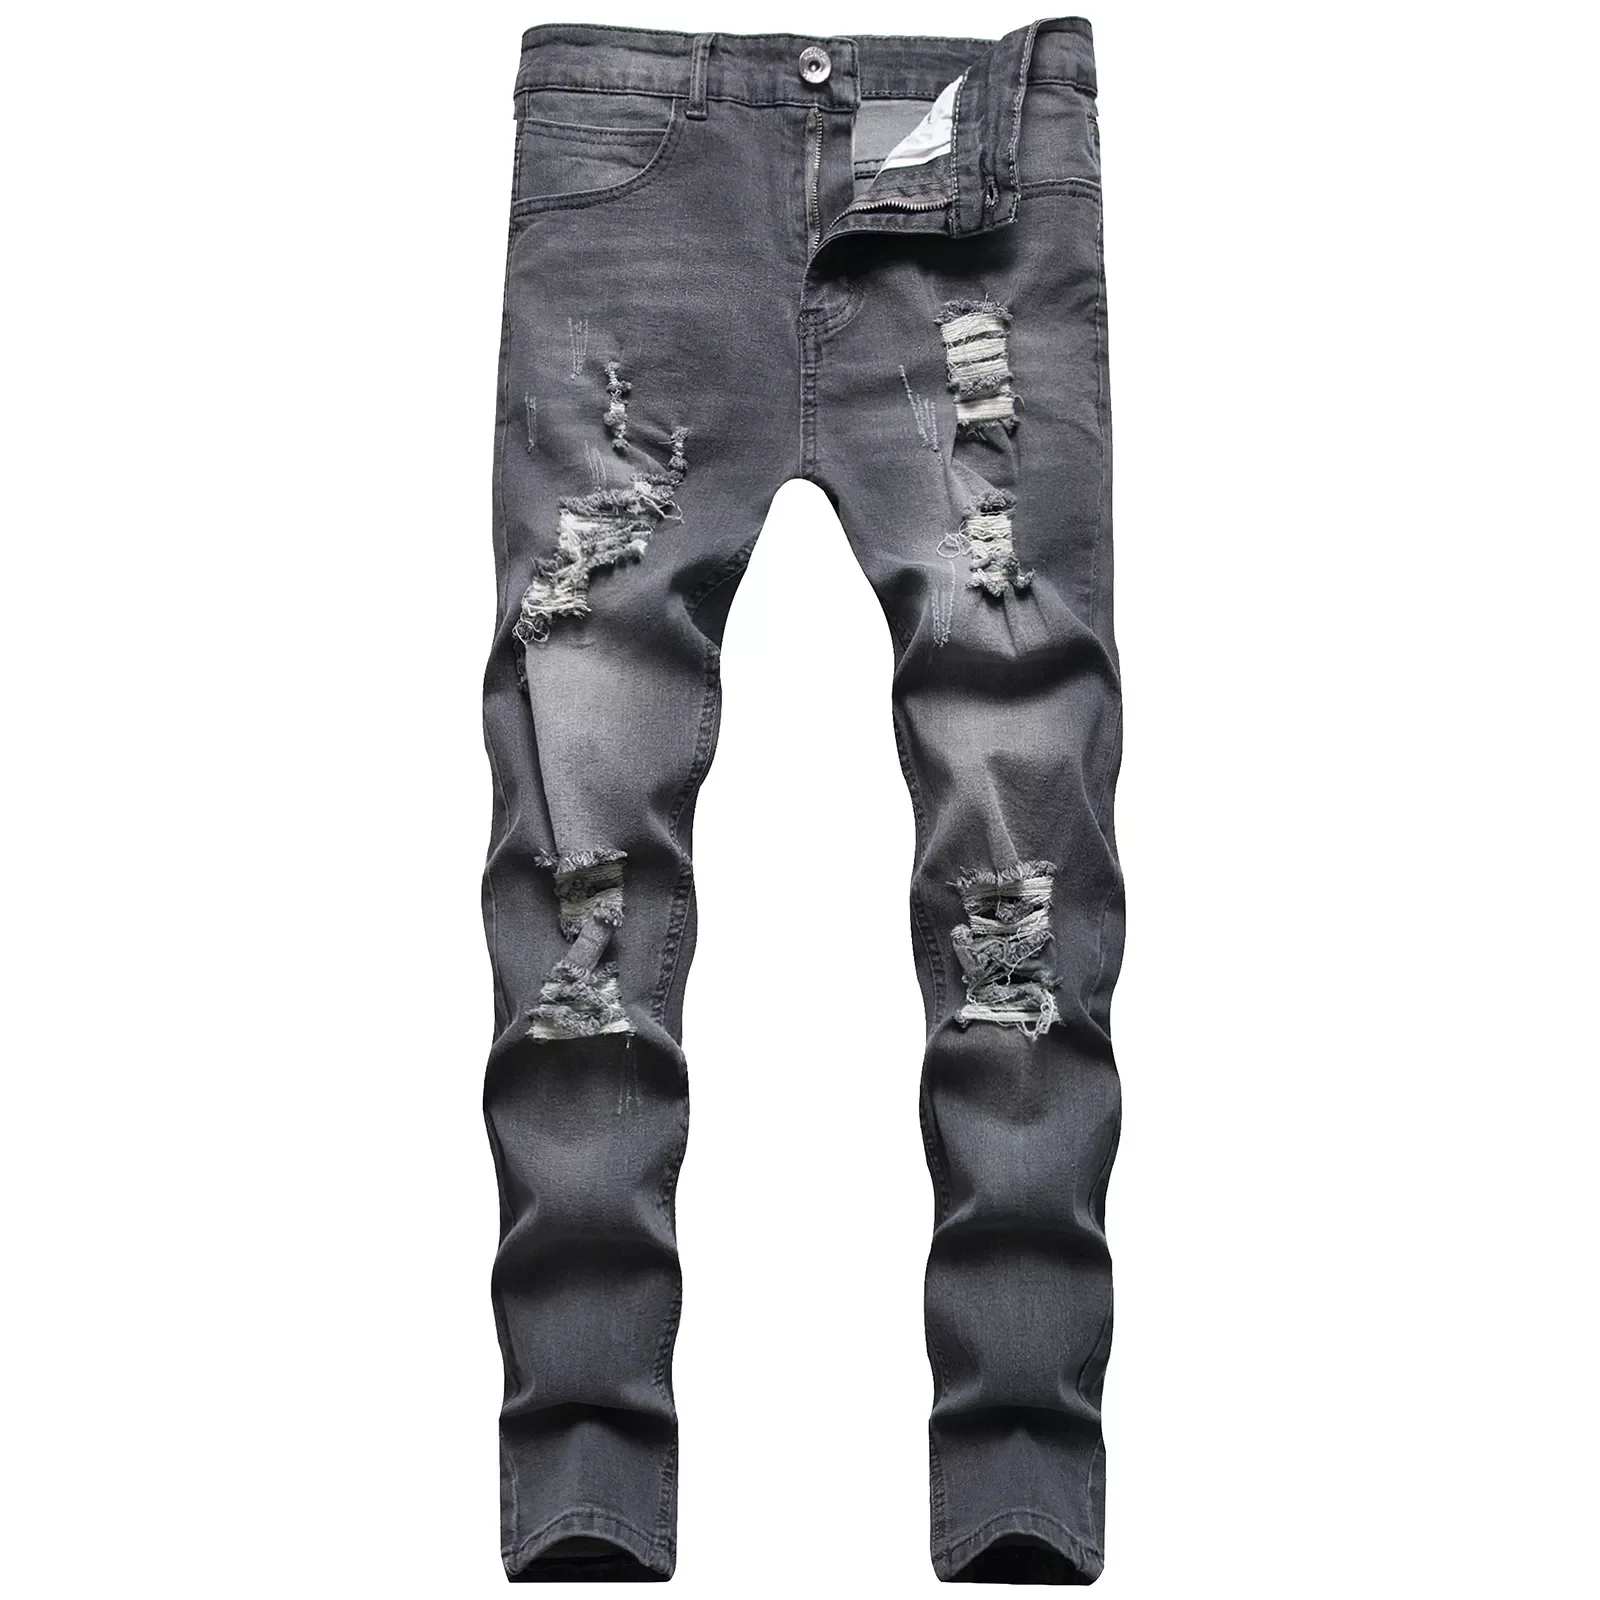 

2023NEW Sweatpants Sexy Hole Jeans Pants Casual Summer Autumn Male Ripped Skinny Trousers Slim Biker Outwears Pants